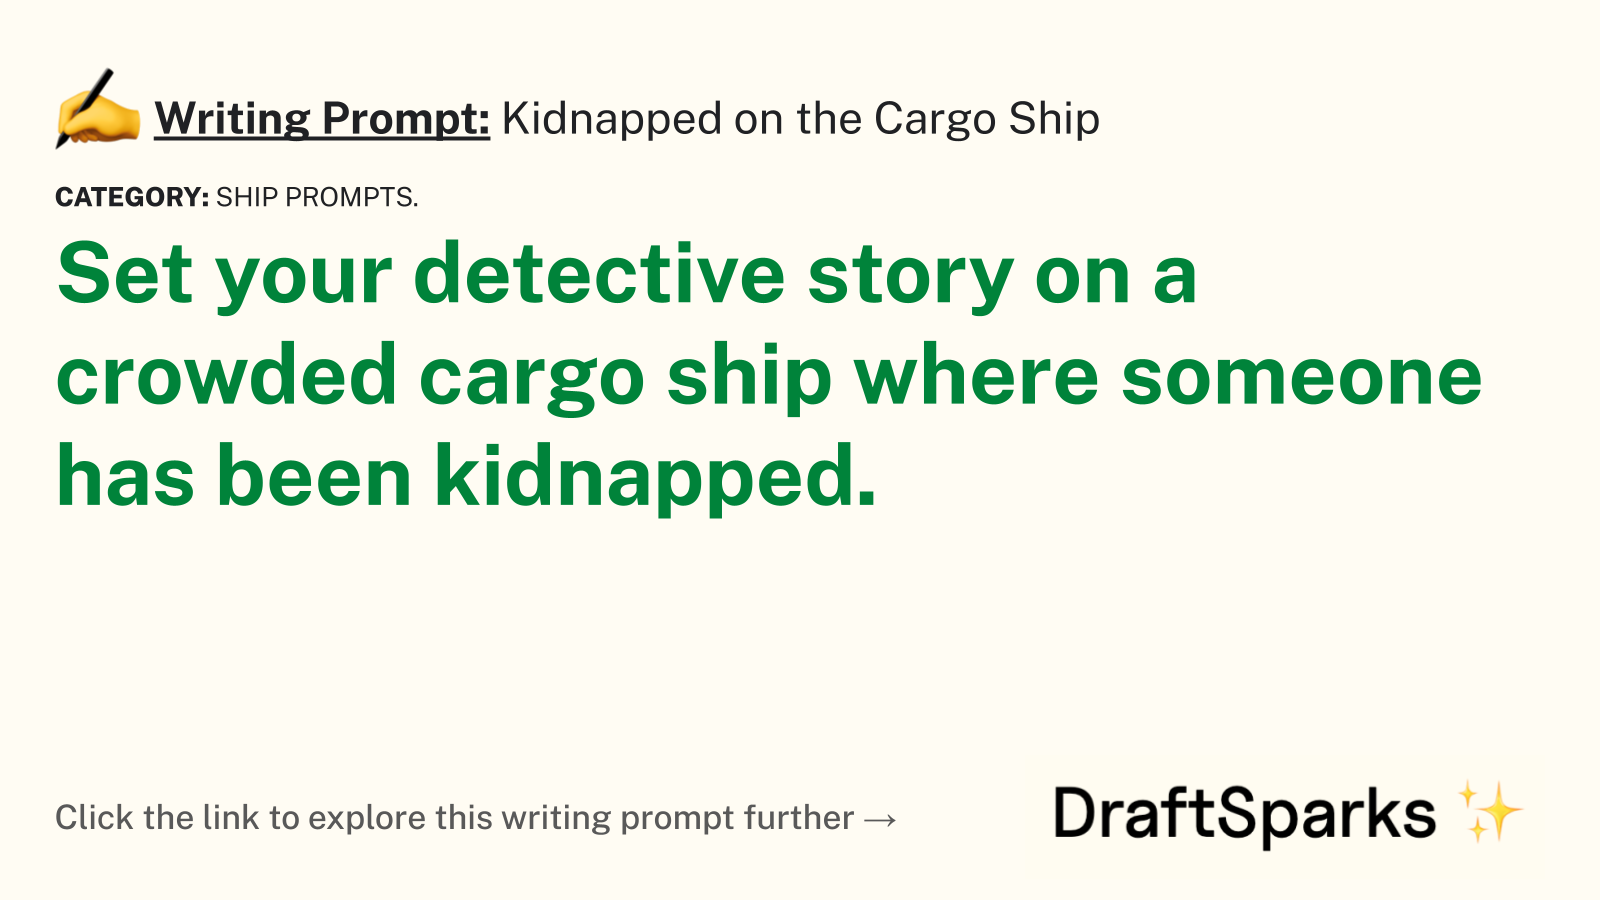 Kidnapped on the Cargo Ship